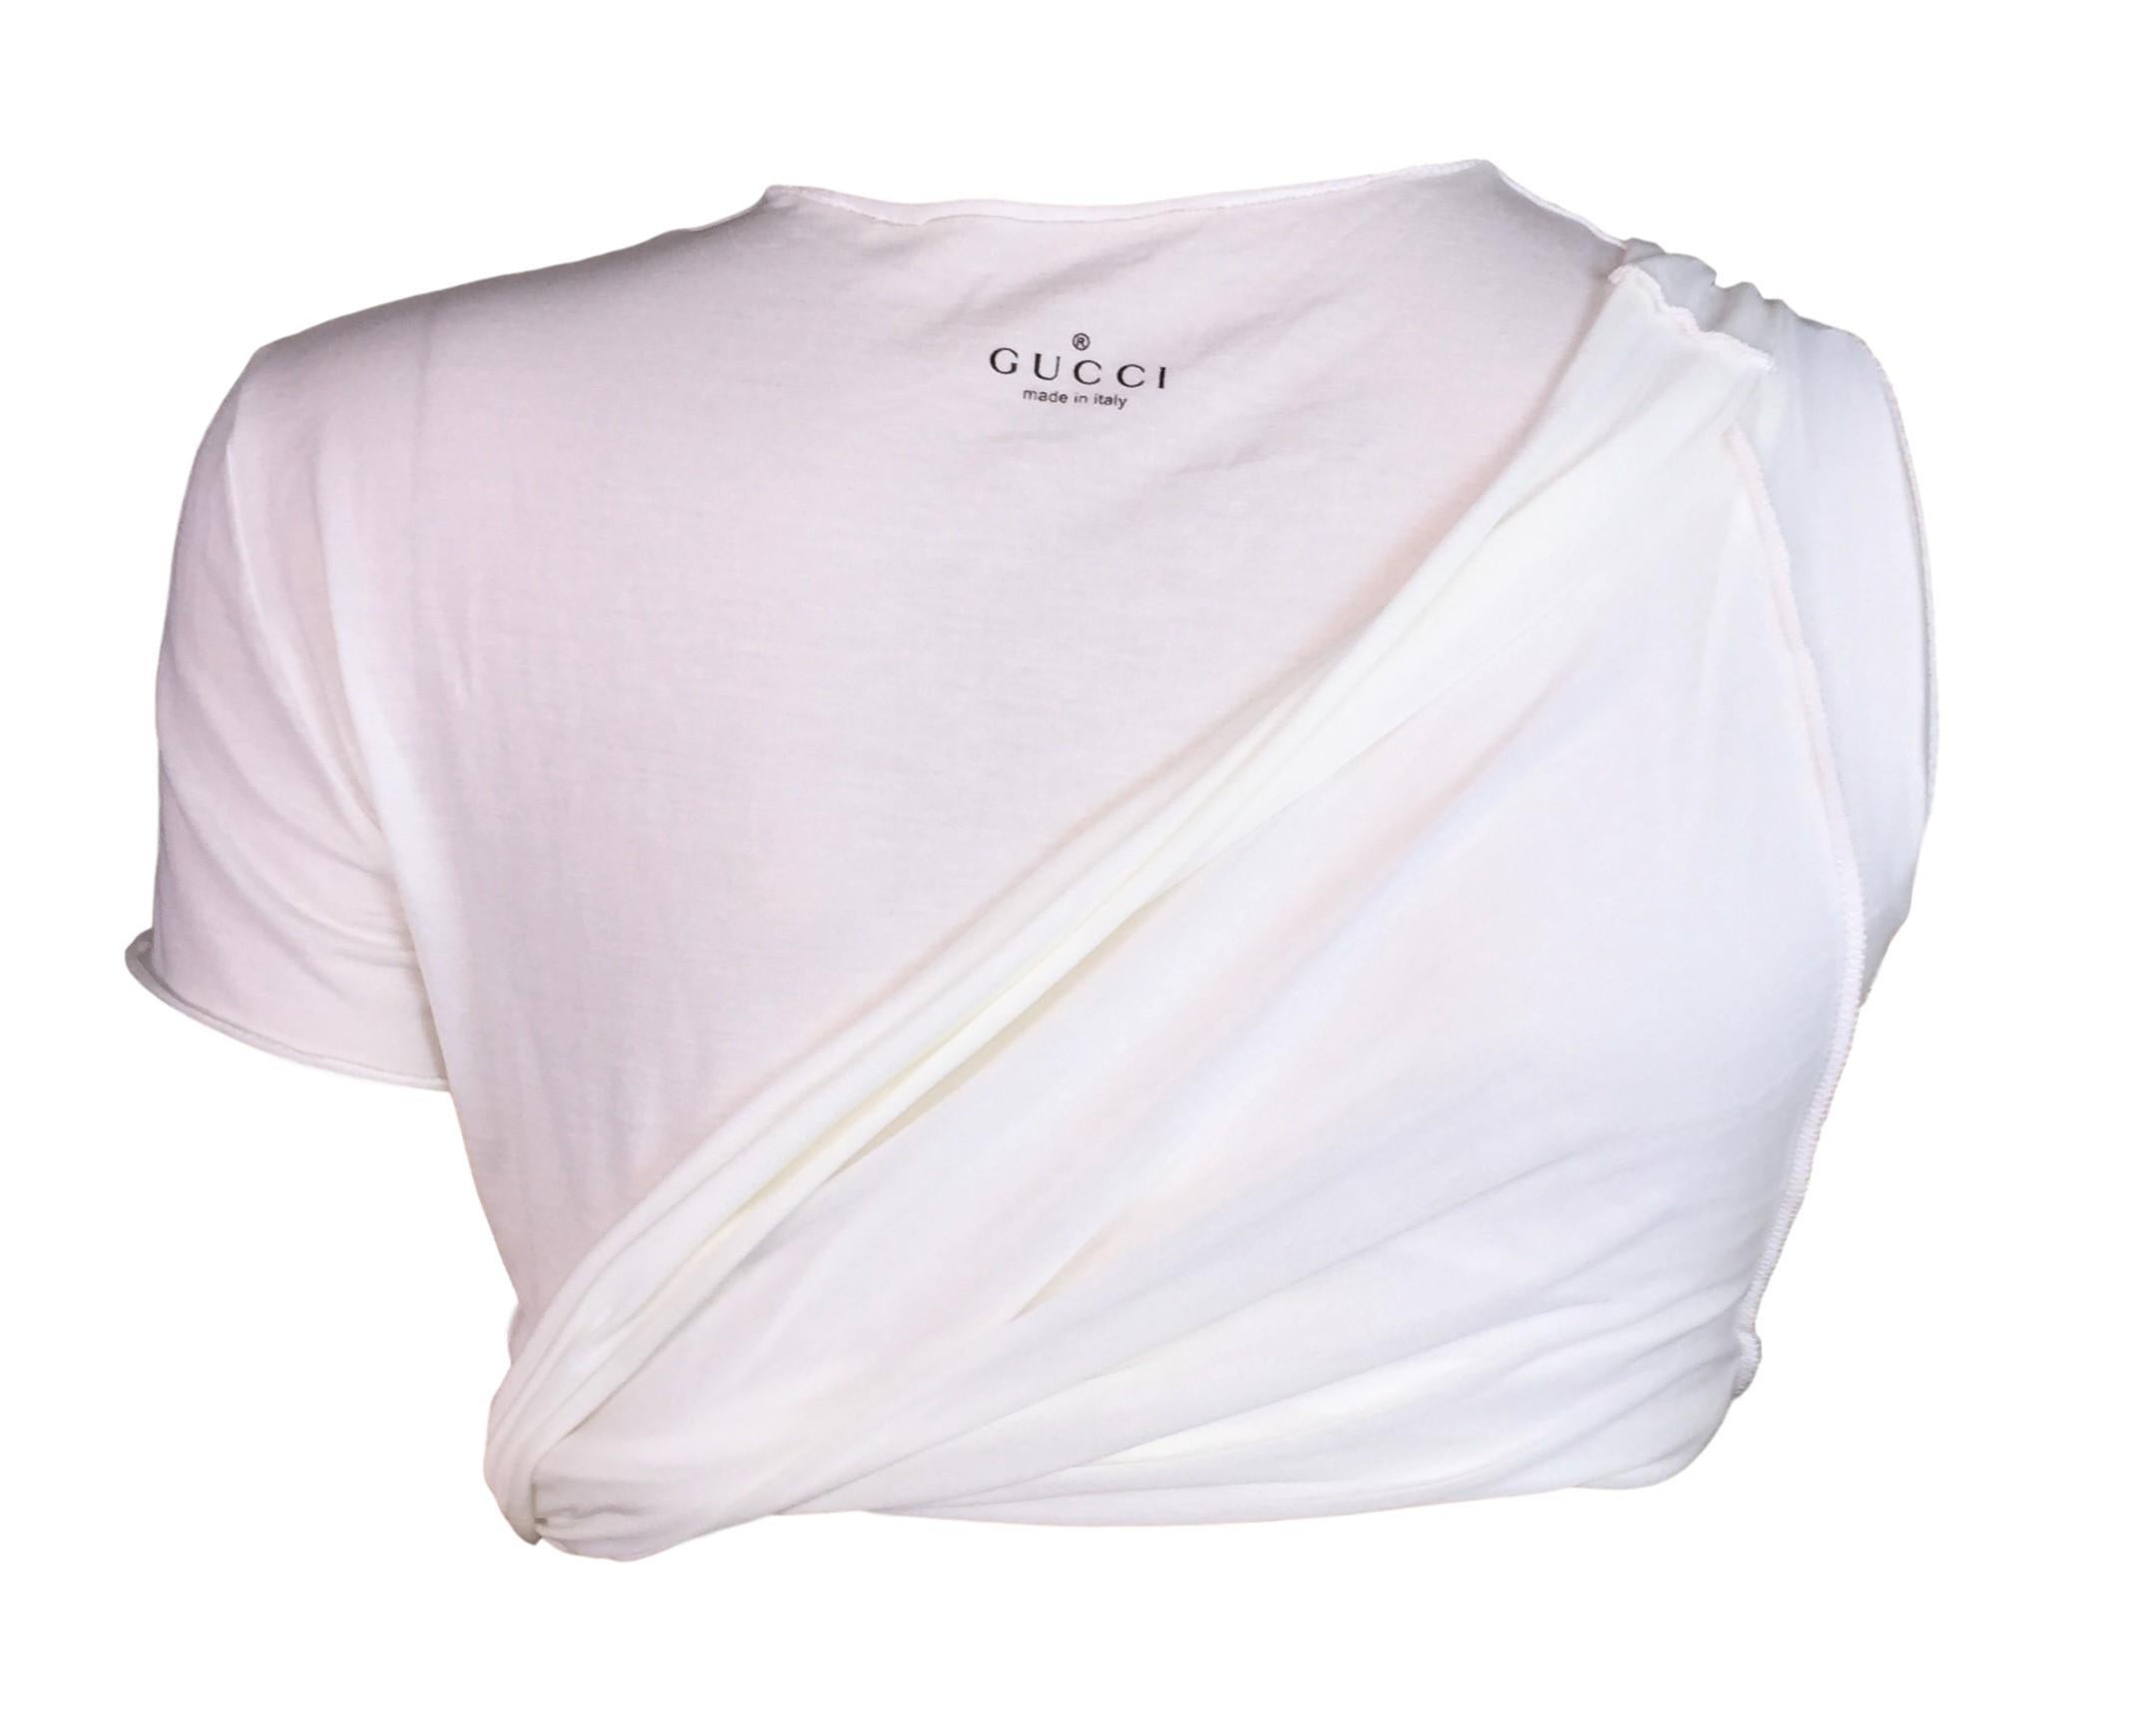 S/S 2001 Gucci Tom Ford Runway Sheer White Cut-Out Crop Top T-Shirt 42 1